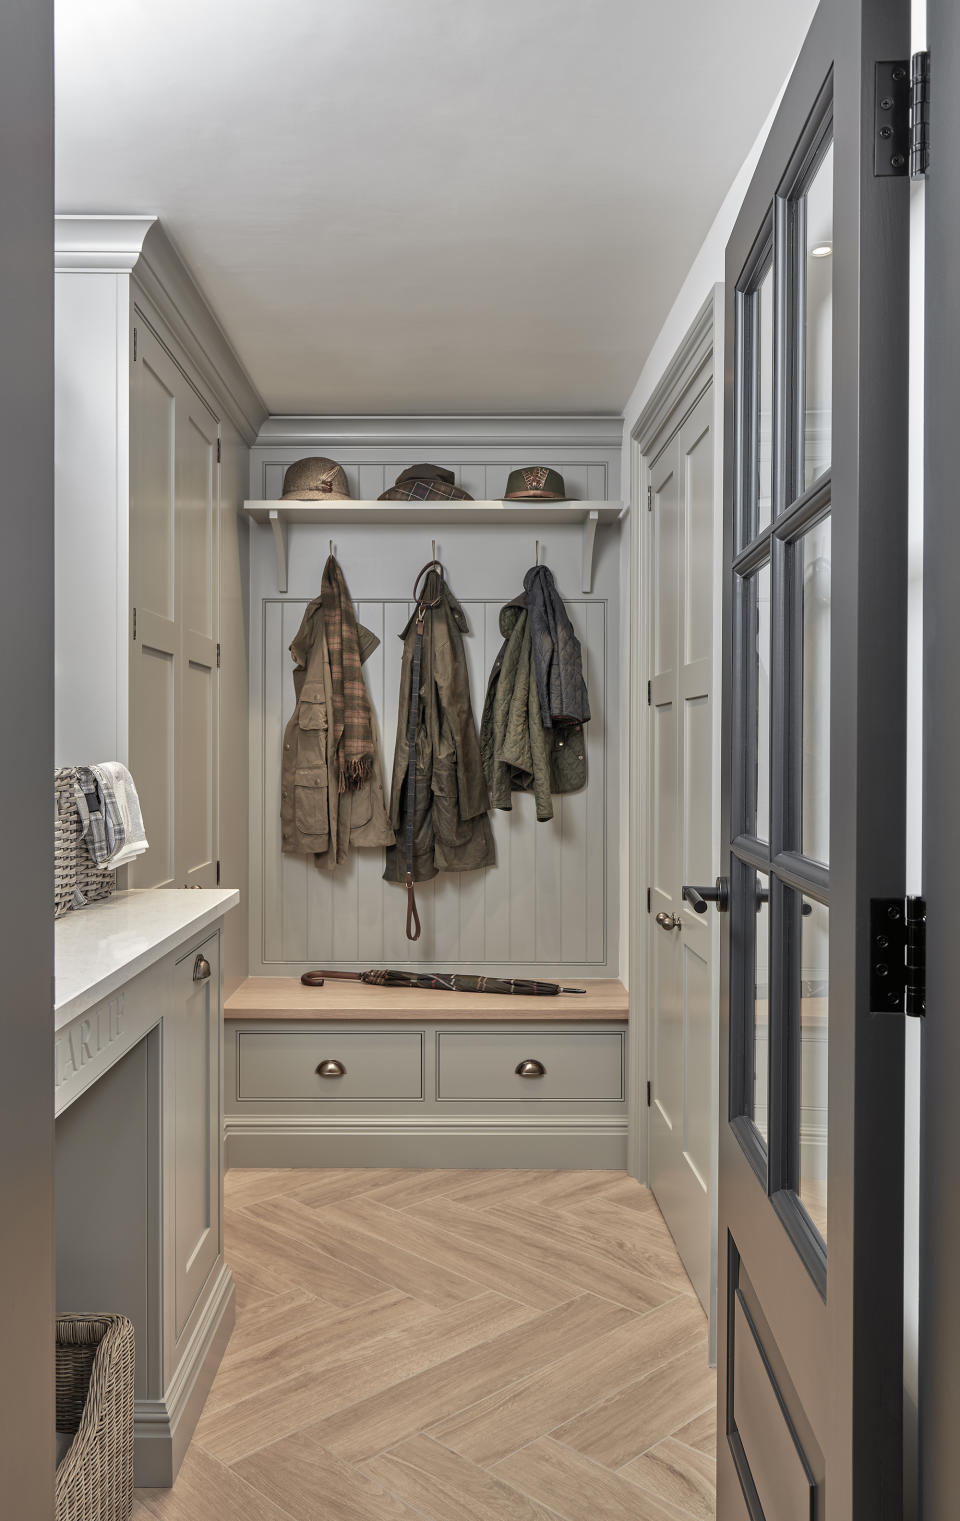 <p> In homes with no porch or separate boot room, utility rooms are increasingly being used as &apos;bootility&apos; rooms, especially if they have an outside door, and are being fitted with coat hooks or closets and seats to take shoes off, as well as drying and storage space for muddy boots. </p> <p> &apos;Bespoke cabinetry will help to build a room that is both a&#xA0;utility&#xA0;room and a&#xA0;boot&#xA0;room, creating a seamless transition in a shared space,&apos; says&#xA0;Tom Howley of the eponymous kitchen brand. </p> <p> &apos;A&#xA0;boot&#xA0;room&#xA0;should include practical storage solutions such as built-in bespoke shelving and coat hooks. Bespoke joinery may cost a little more, but it does mean that the design will be perfectly suited to the space. Do try to combine seating and storage as well a basket for each member of the family to store items of outdoor clothing,&apos; adds Louise Wicksteed, design director of Sims Hilditch. </p> <p> <br> </p>